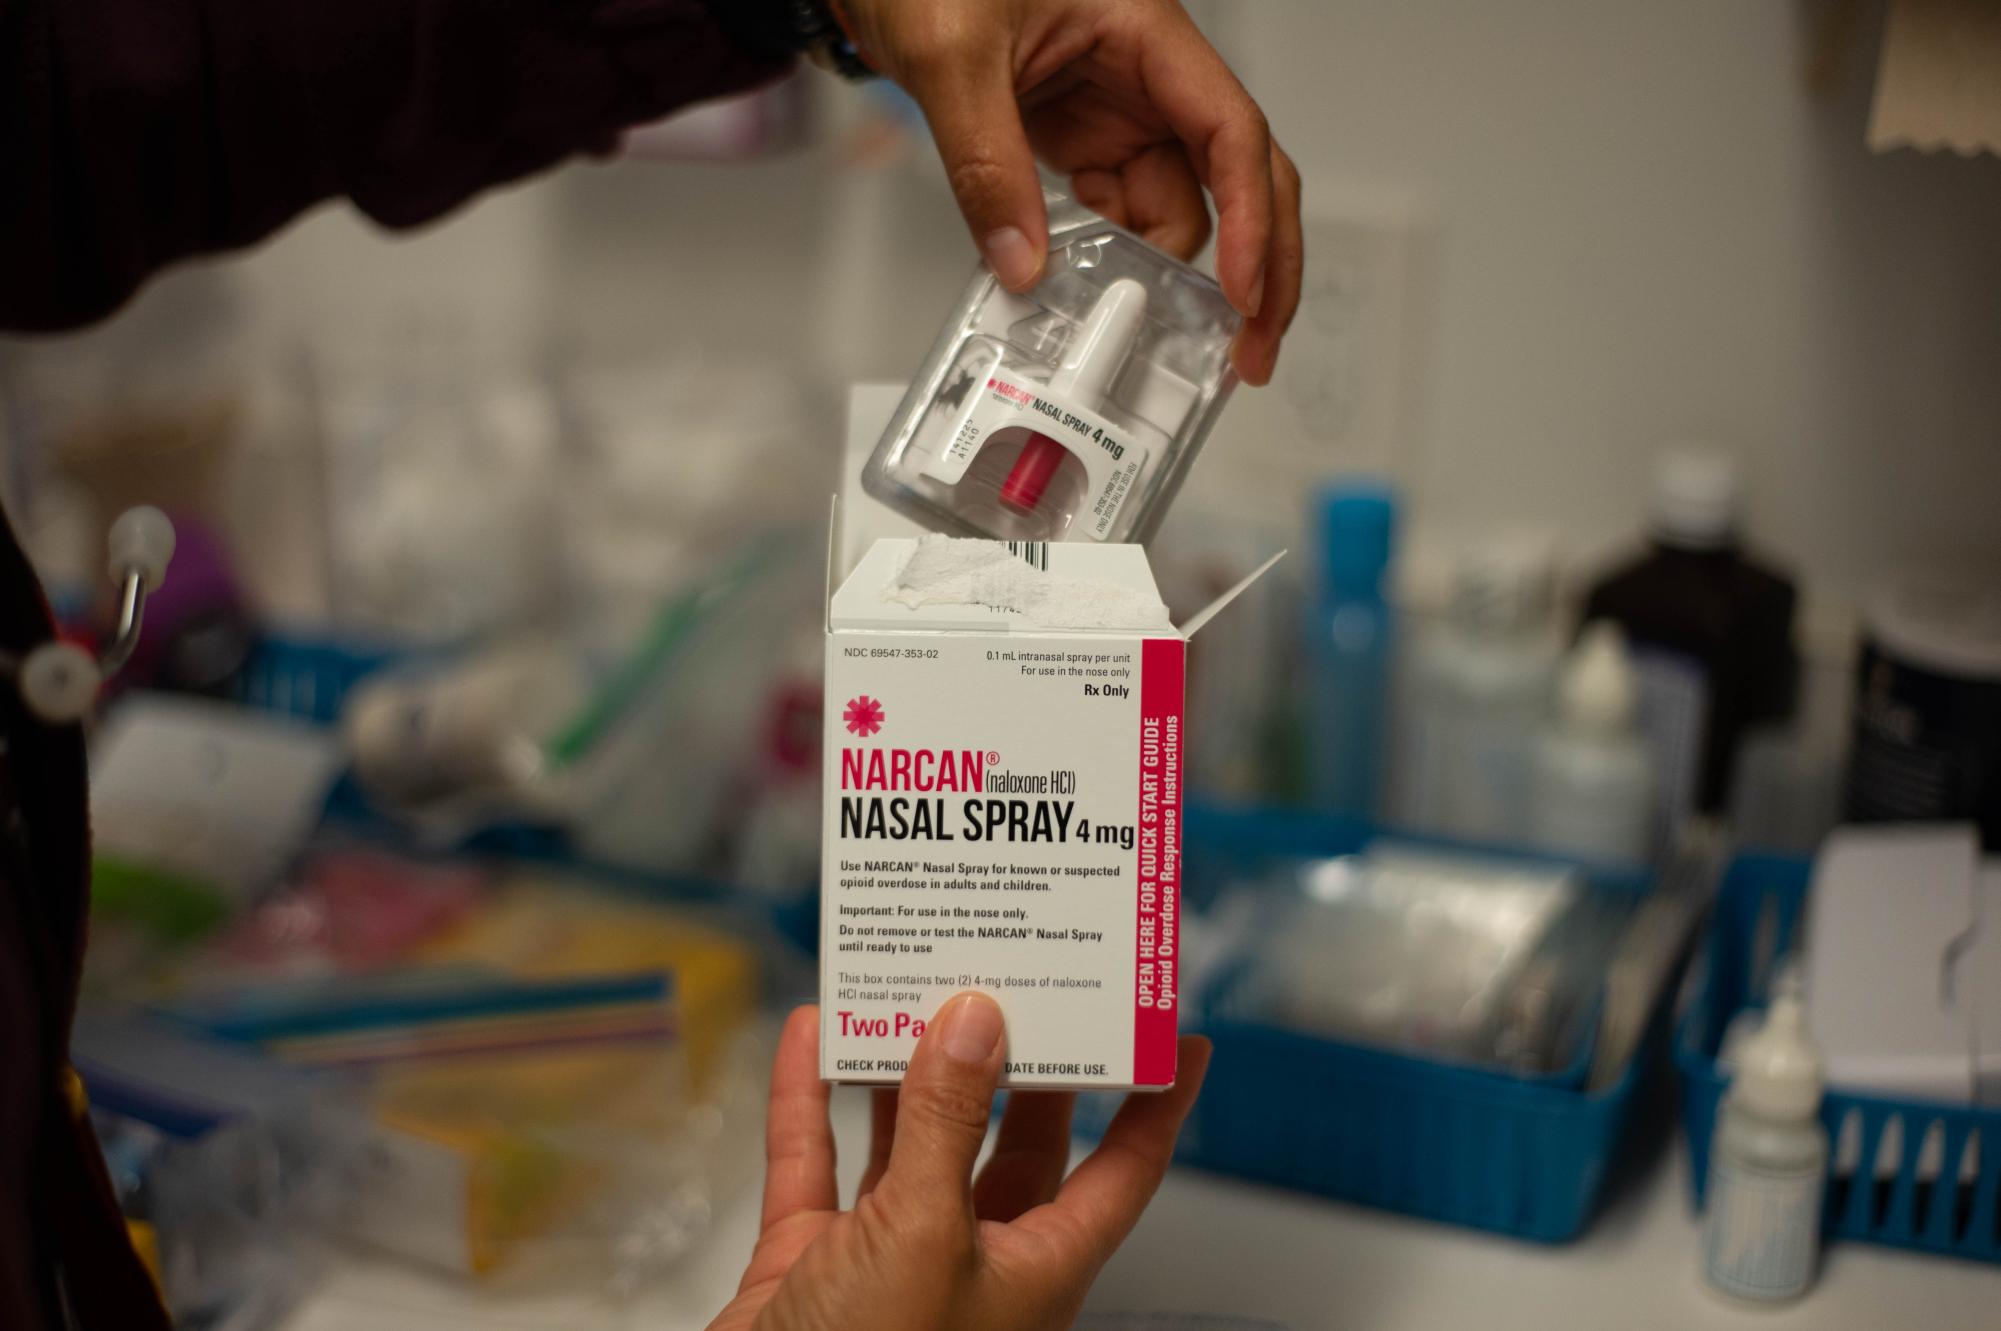 Narcan, an opioid antagonist designed to prevent overdoses, is now available in the U-High nurses office. As a measure of protecting public health, we want to be prepared to treat anything that comes our way, Laboratory Schools lead nurse Kristen Szewczyk said.